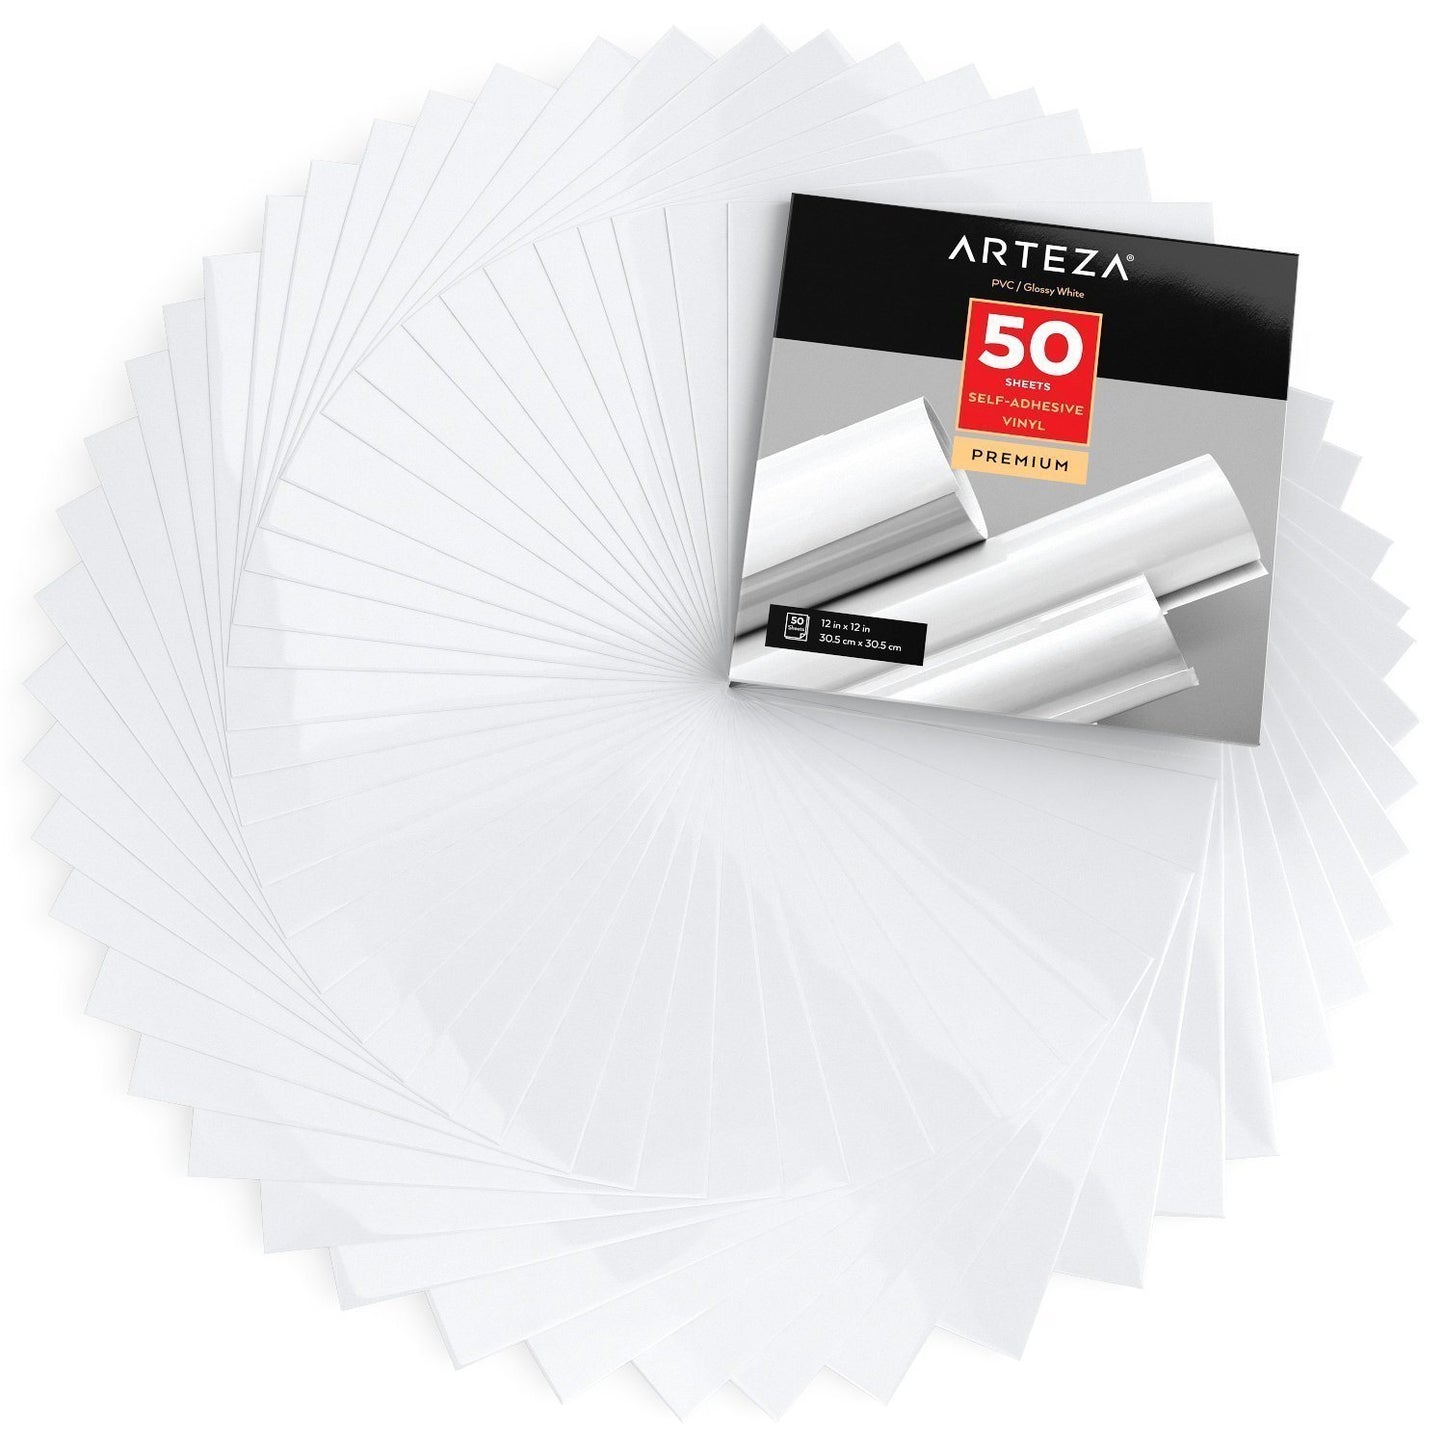 Self Adhesive Vinyl, Glossy White, 12" x 12" Sheets - Pack of 50